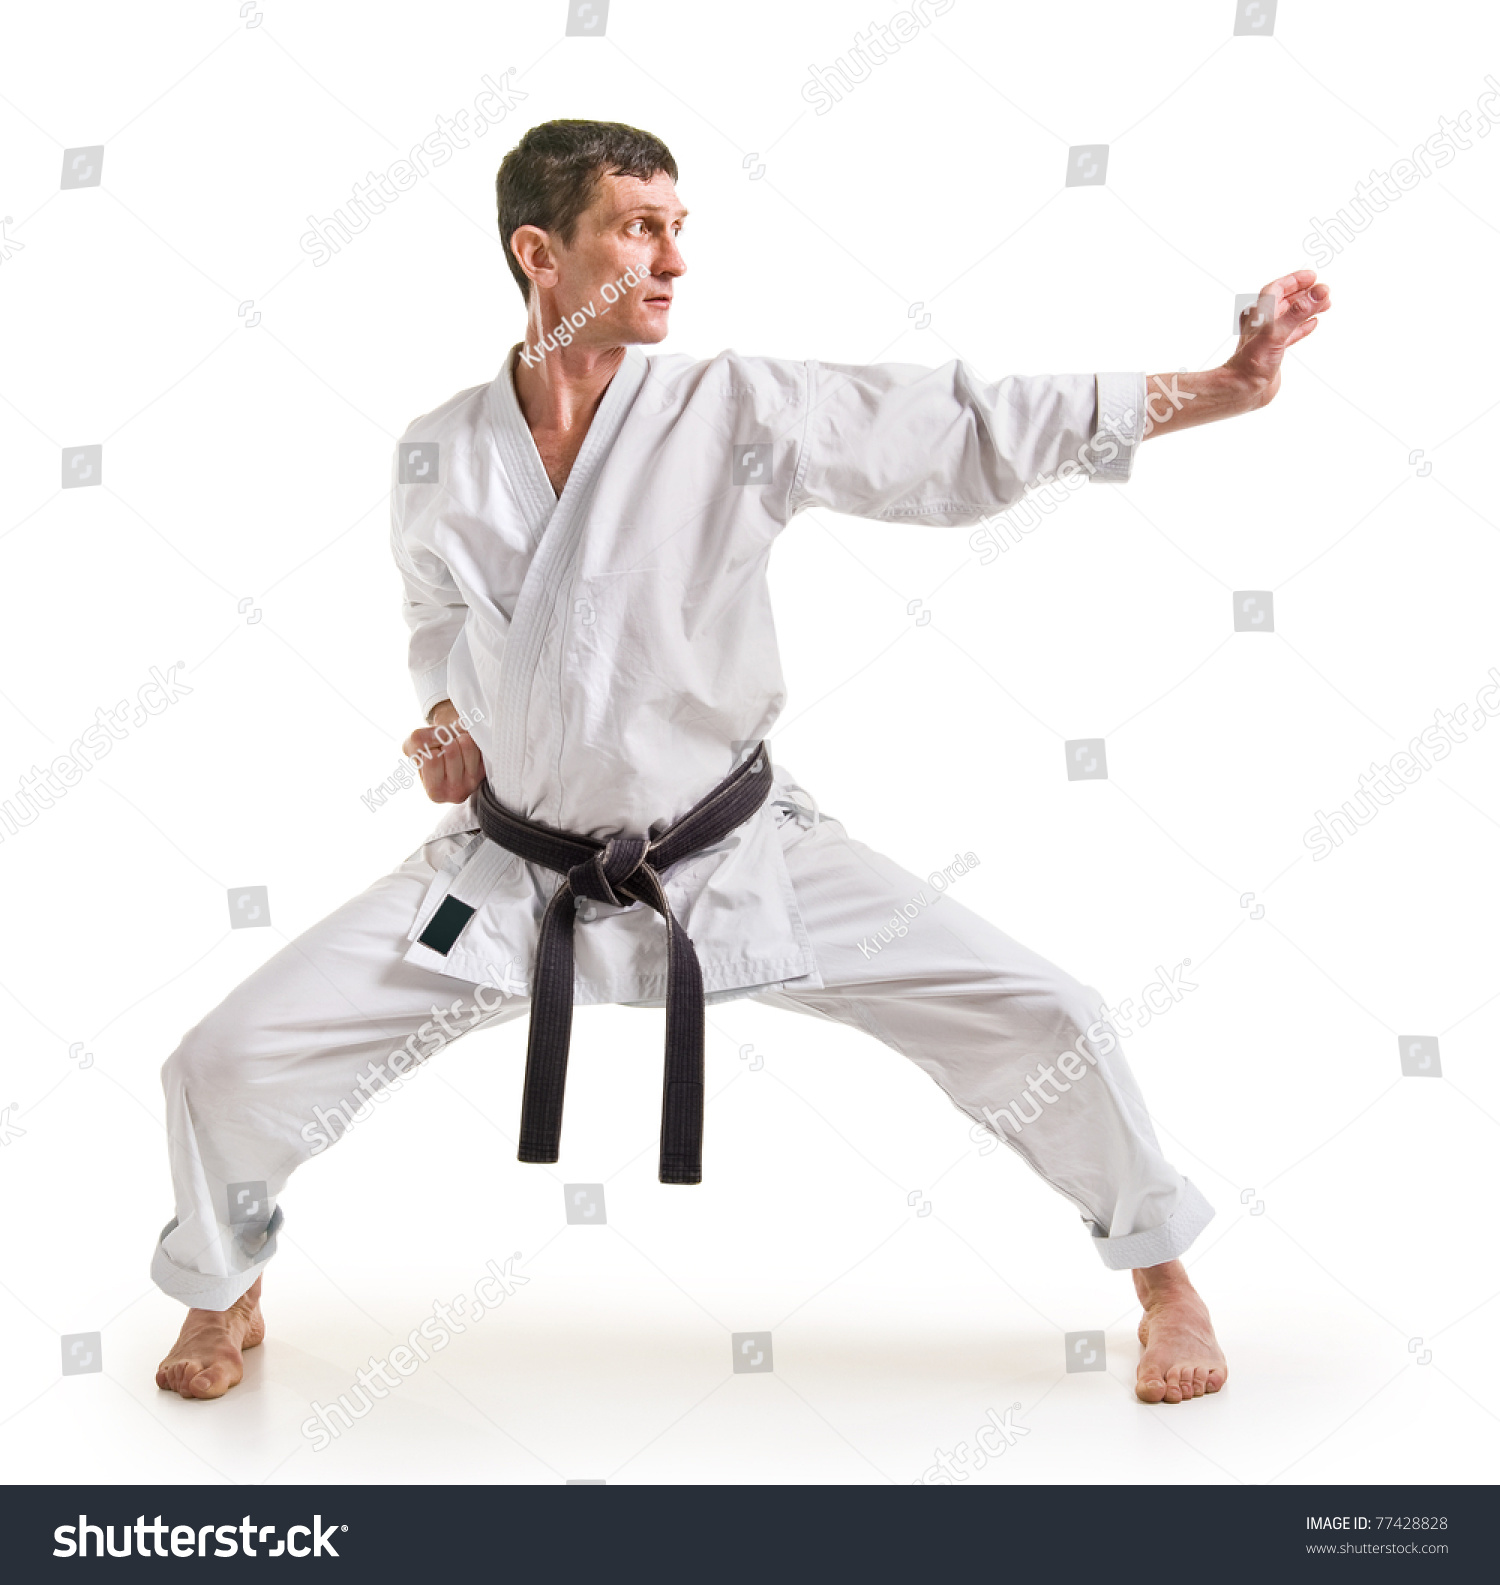 Royalty-free Punch.figure in the karate fighting… #77428828 Stock ...